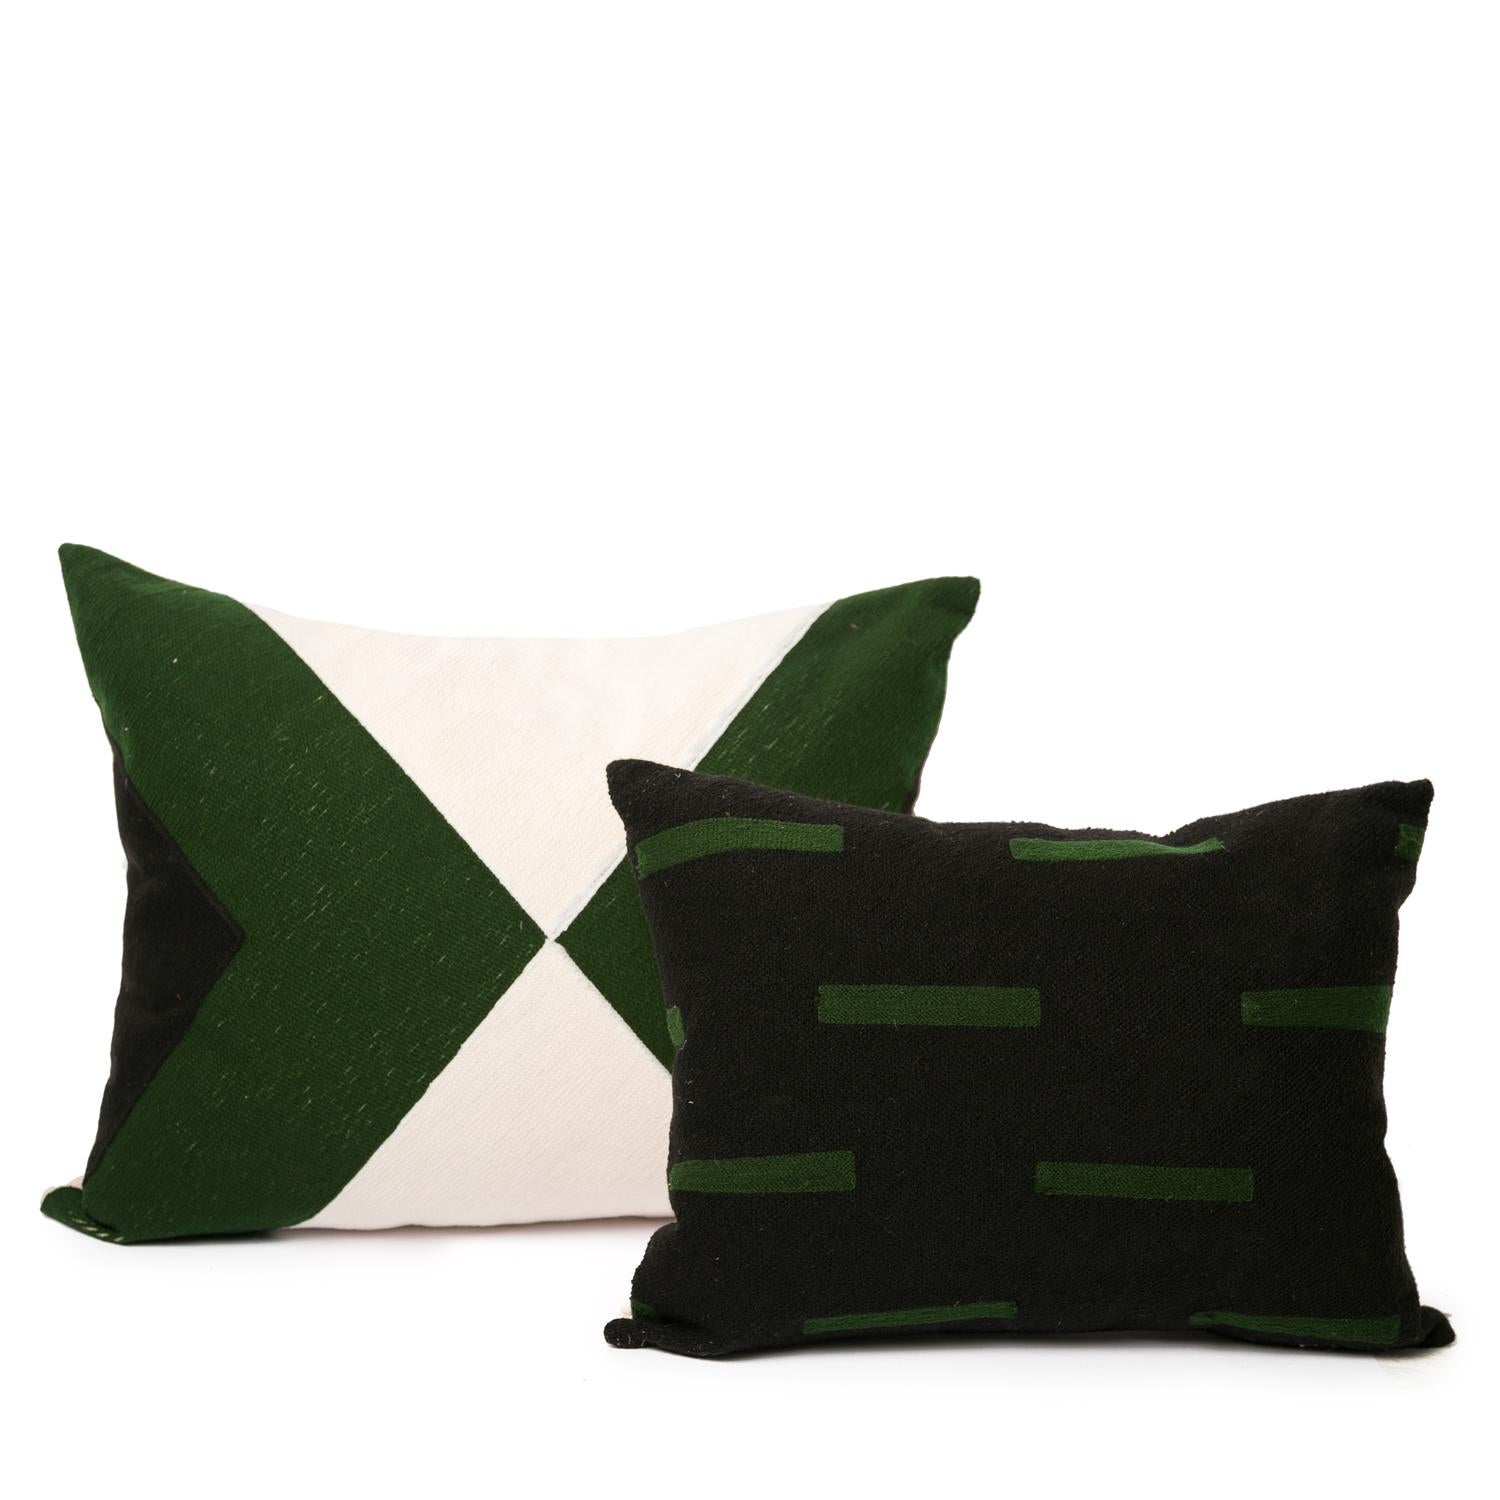 Contemporary Modern Kilombo Home Embroidery Pillow Cushion Cotton Bee Ivory Black& Dark Green For Sale